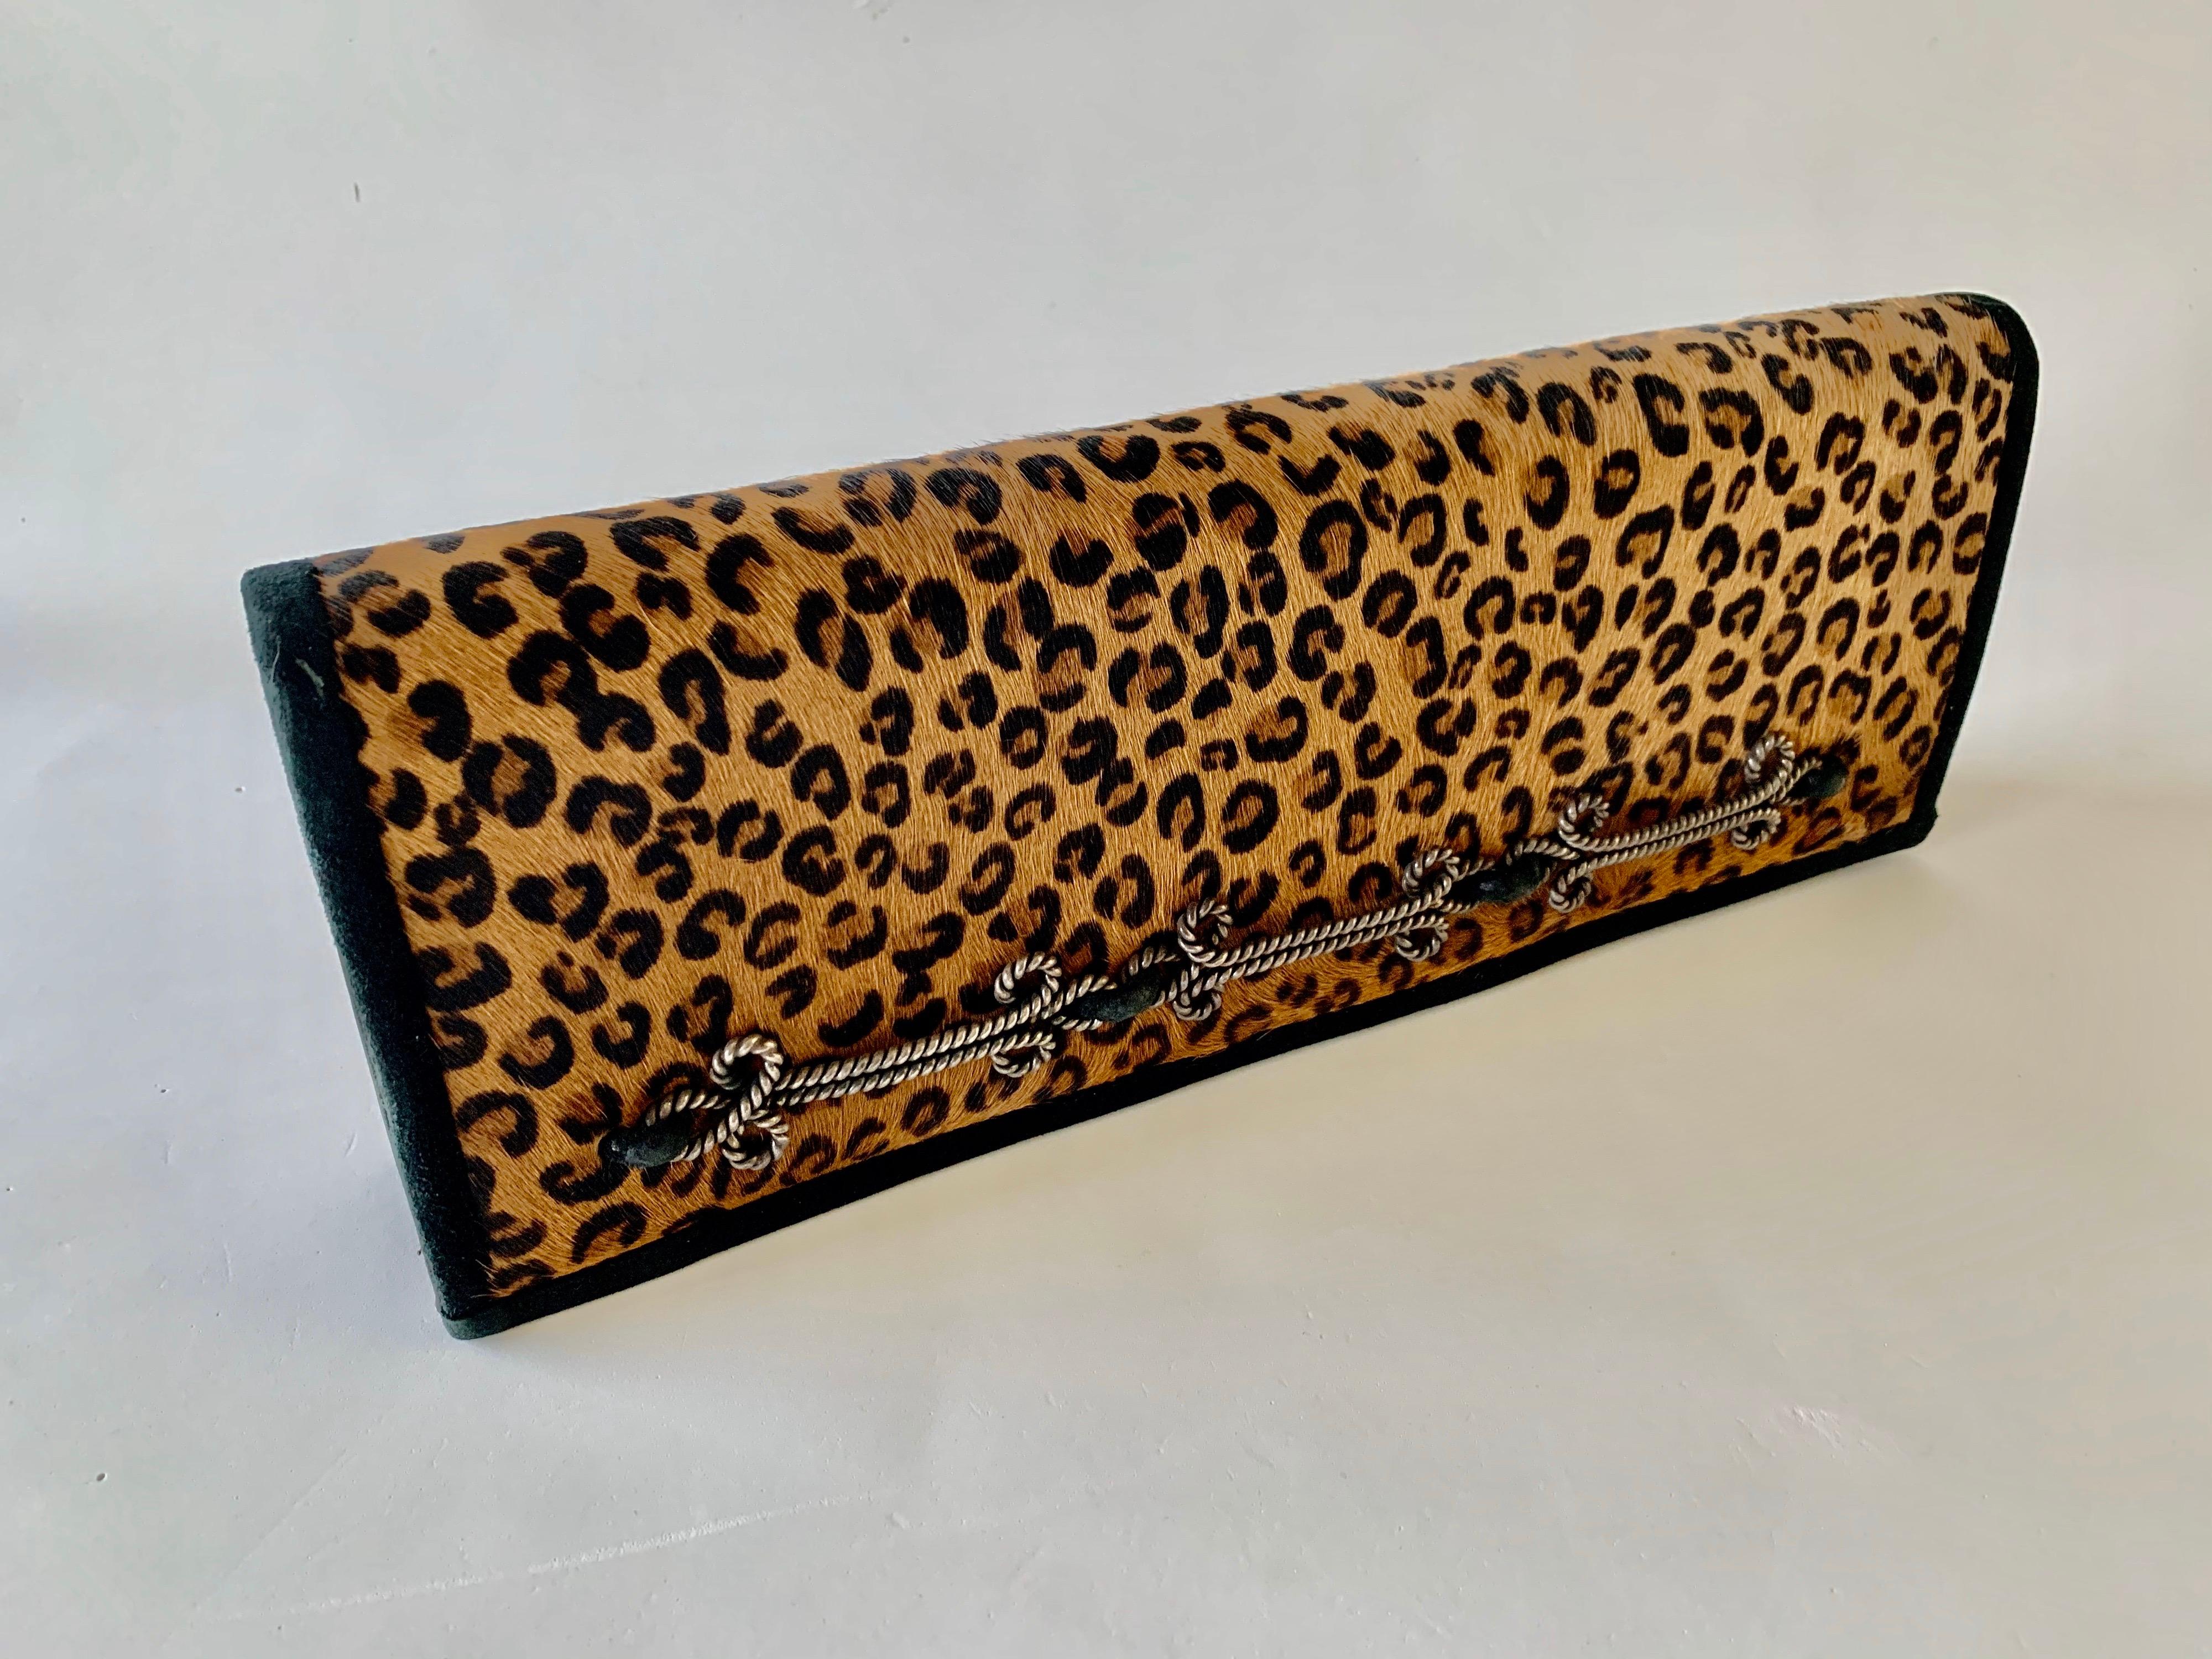 Scarce vintage Givenchy, Paris, haute couture leopard envelope clutch - handcrafted the clutch features a color blocking technique which is comprised out of the finest pony hair and leather, in an elongated envelope shape. The piece is accented by